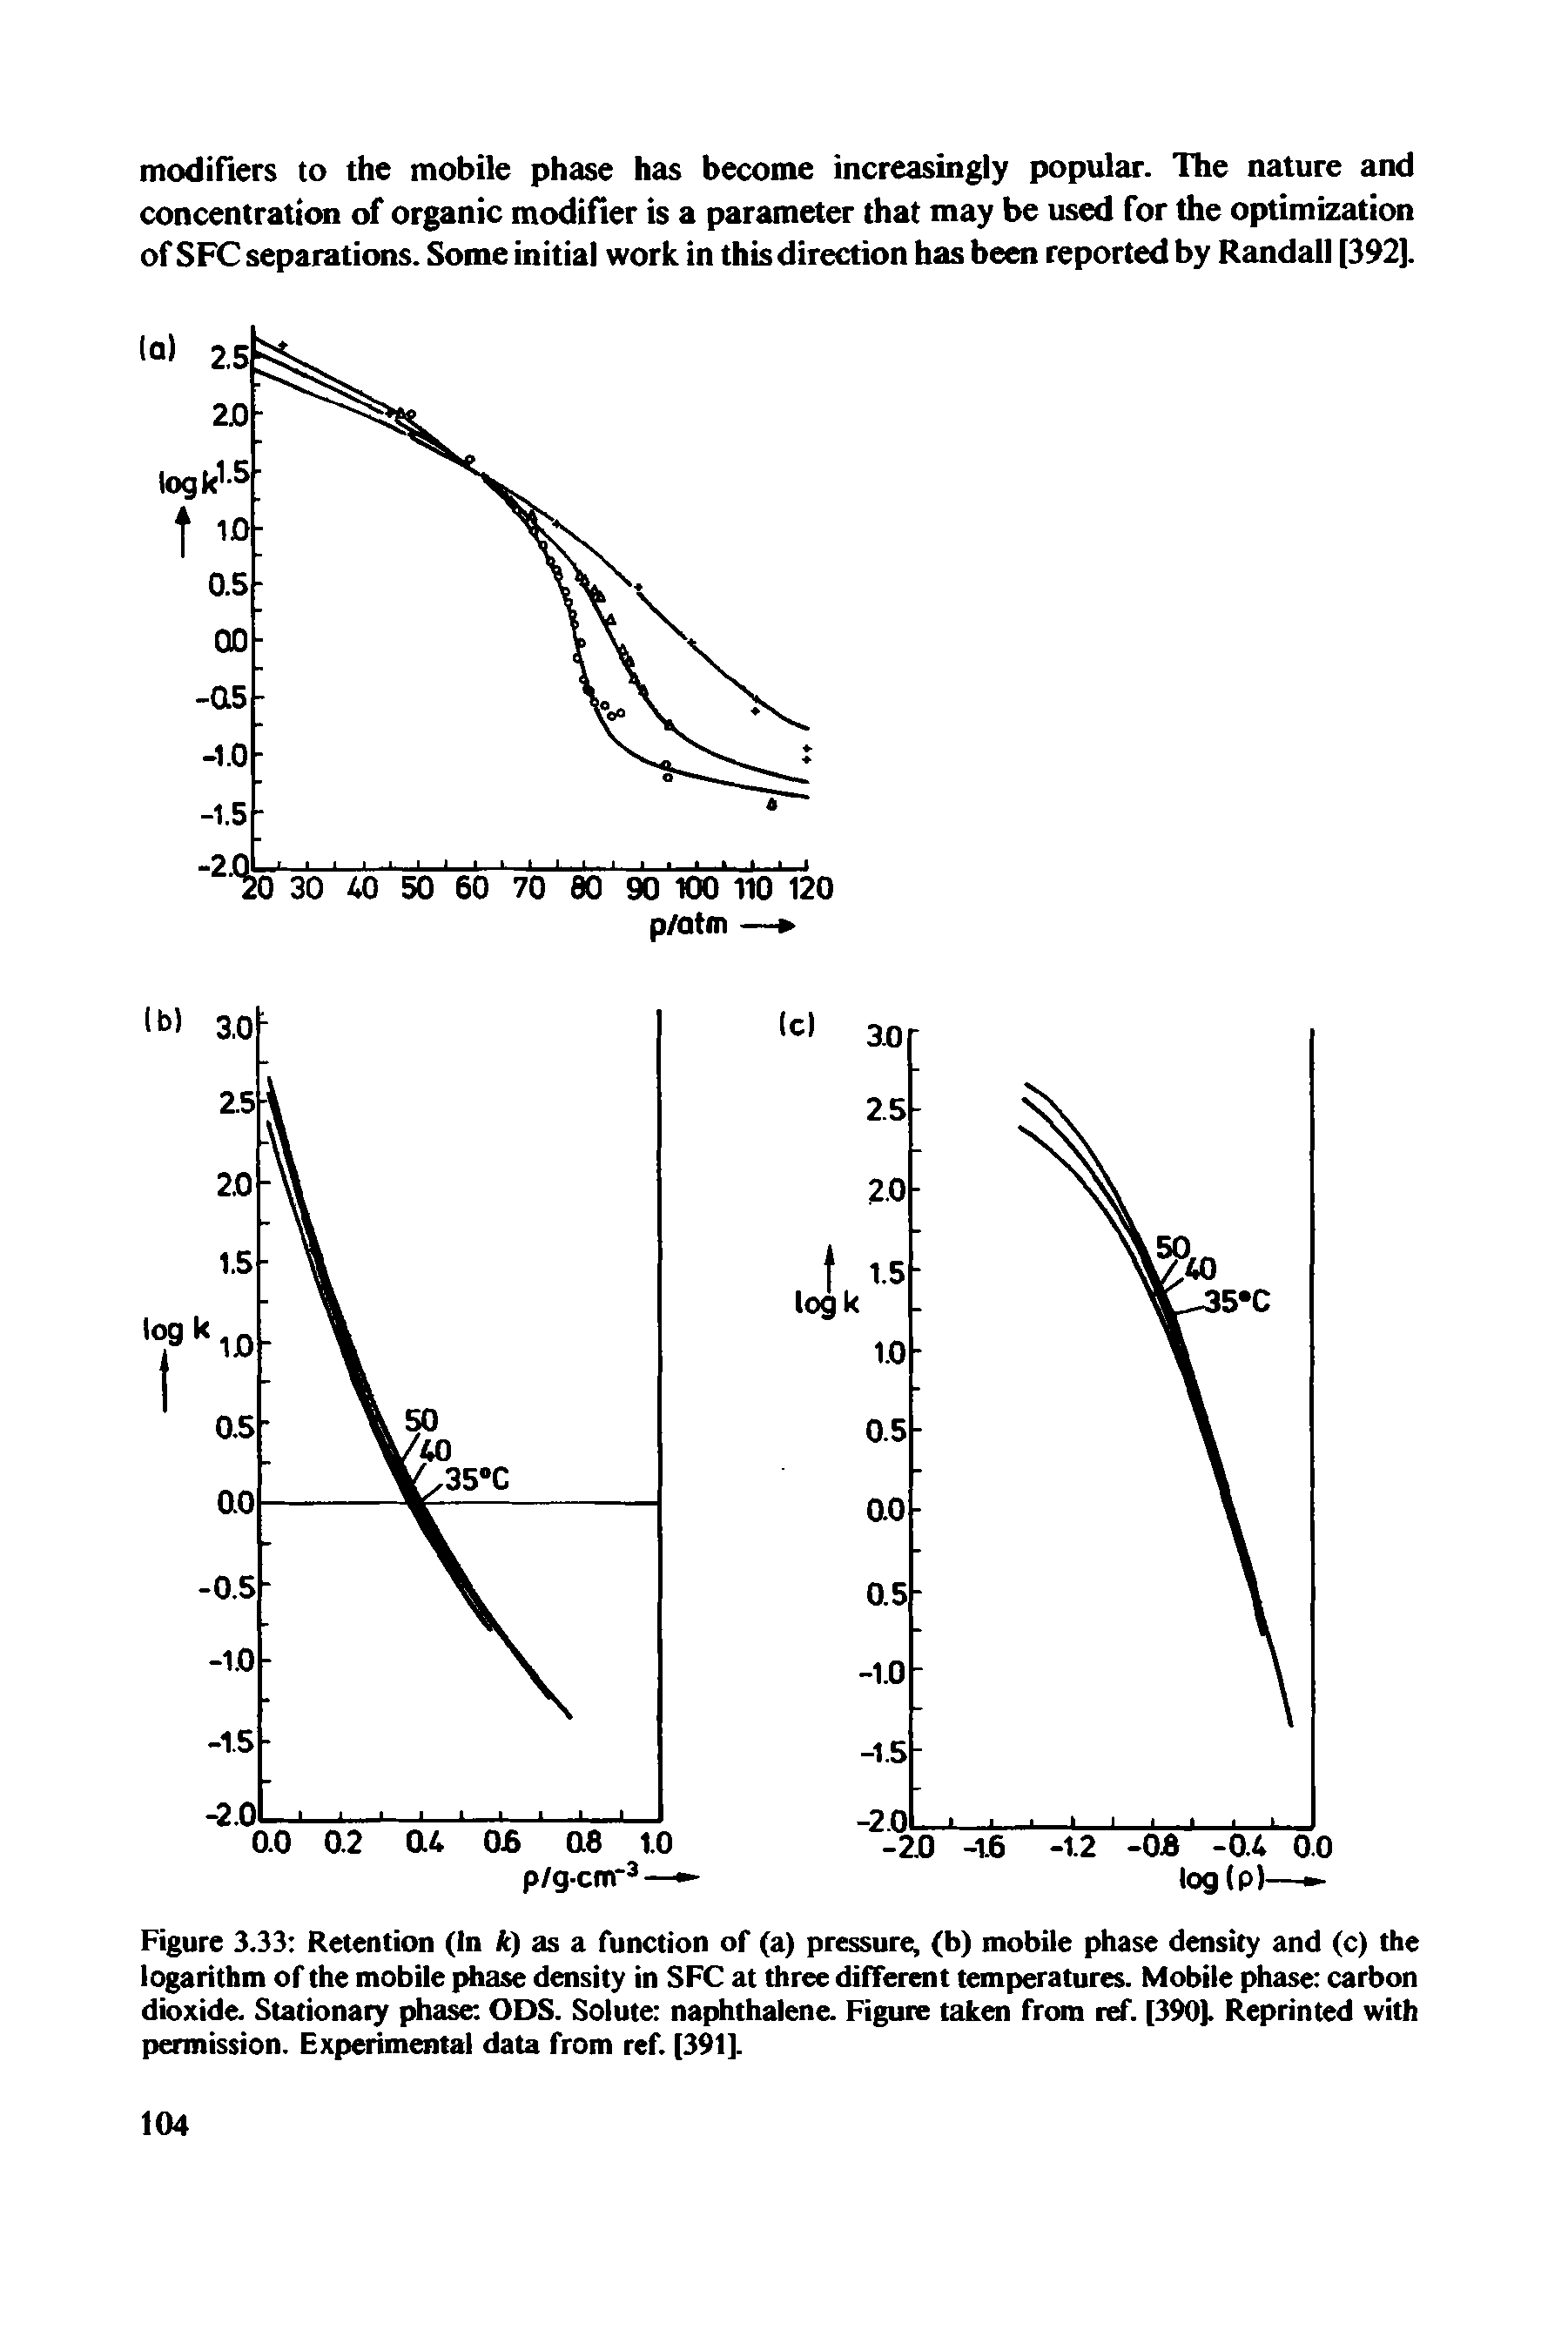 Figure 3.33 Retention (In ft) as a function of (a) pressure, (b) mobile phase density and (c) the logarithm of the mobile phase density in SFC at three different temperatures. Mobile phase carbon dioxide. Stationary phase ODS. Solute naphthalene. Figure taken from ref. [390]. Reprinted with permission. Experimental data from ref. [391].